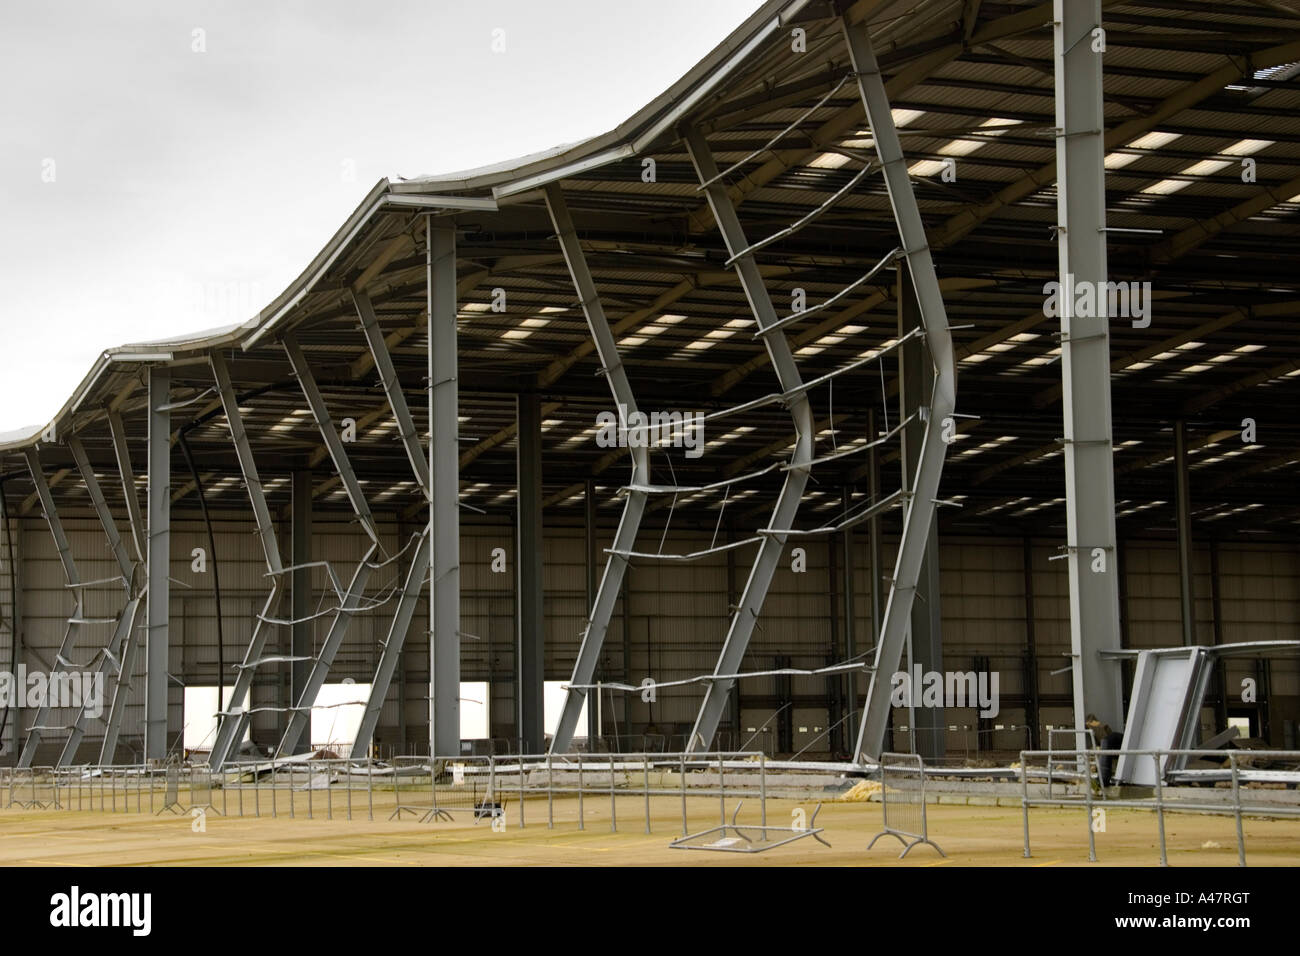 Damage to warehouse caused by Buncefield explosion Stock Photo